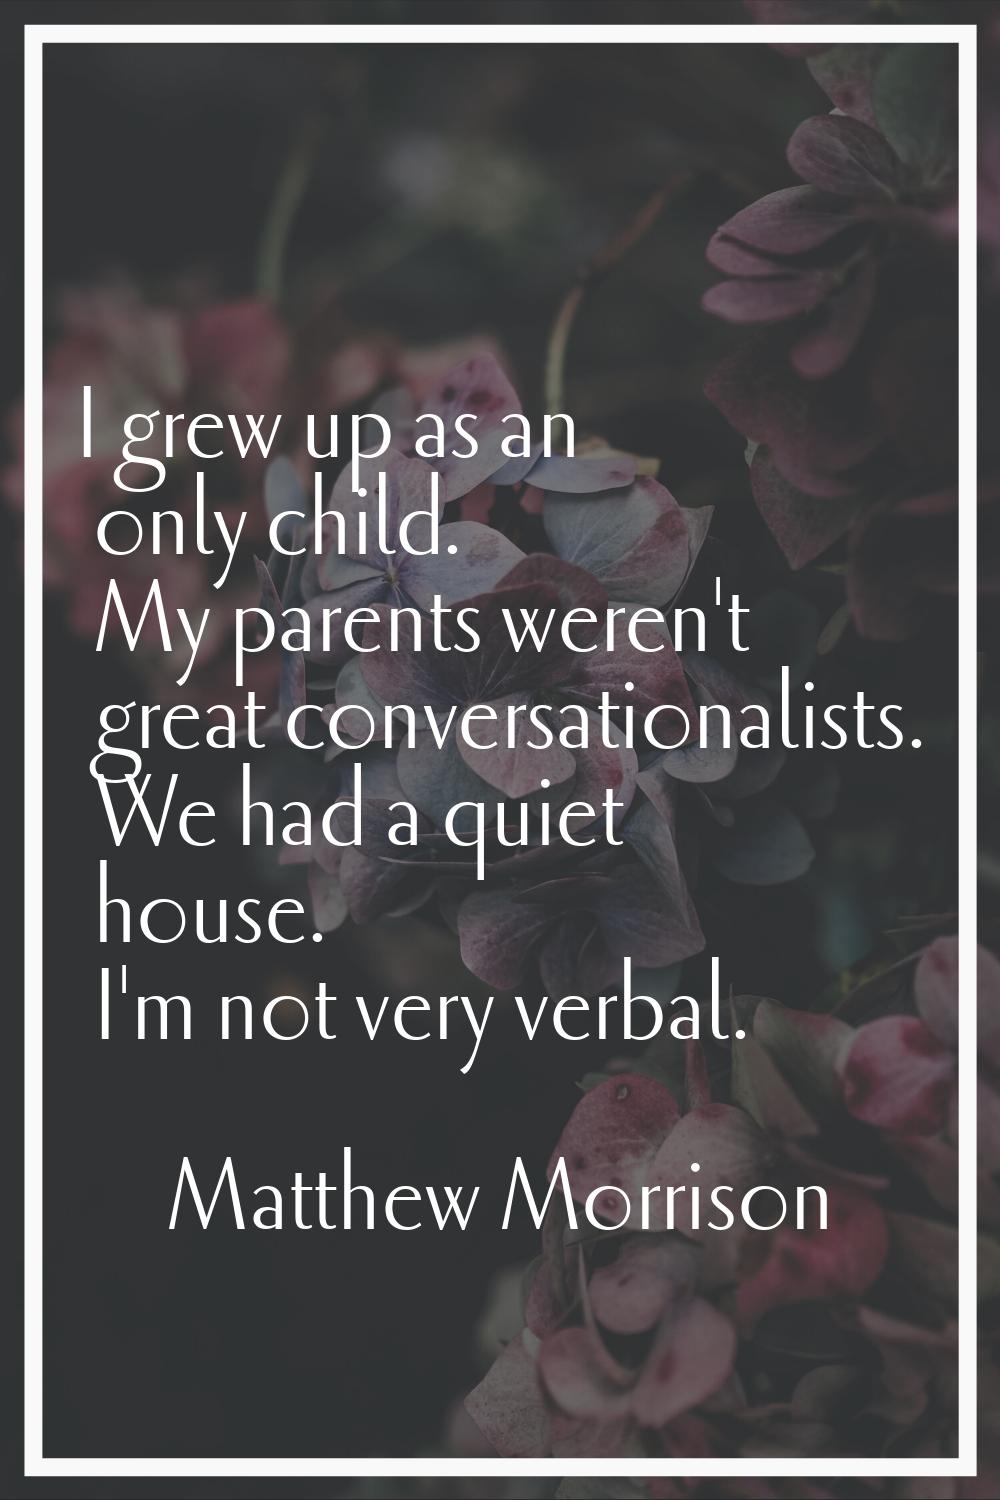 I grew up as an only child. My parents weren't great conversationalists. We had a quiet house. I'm 